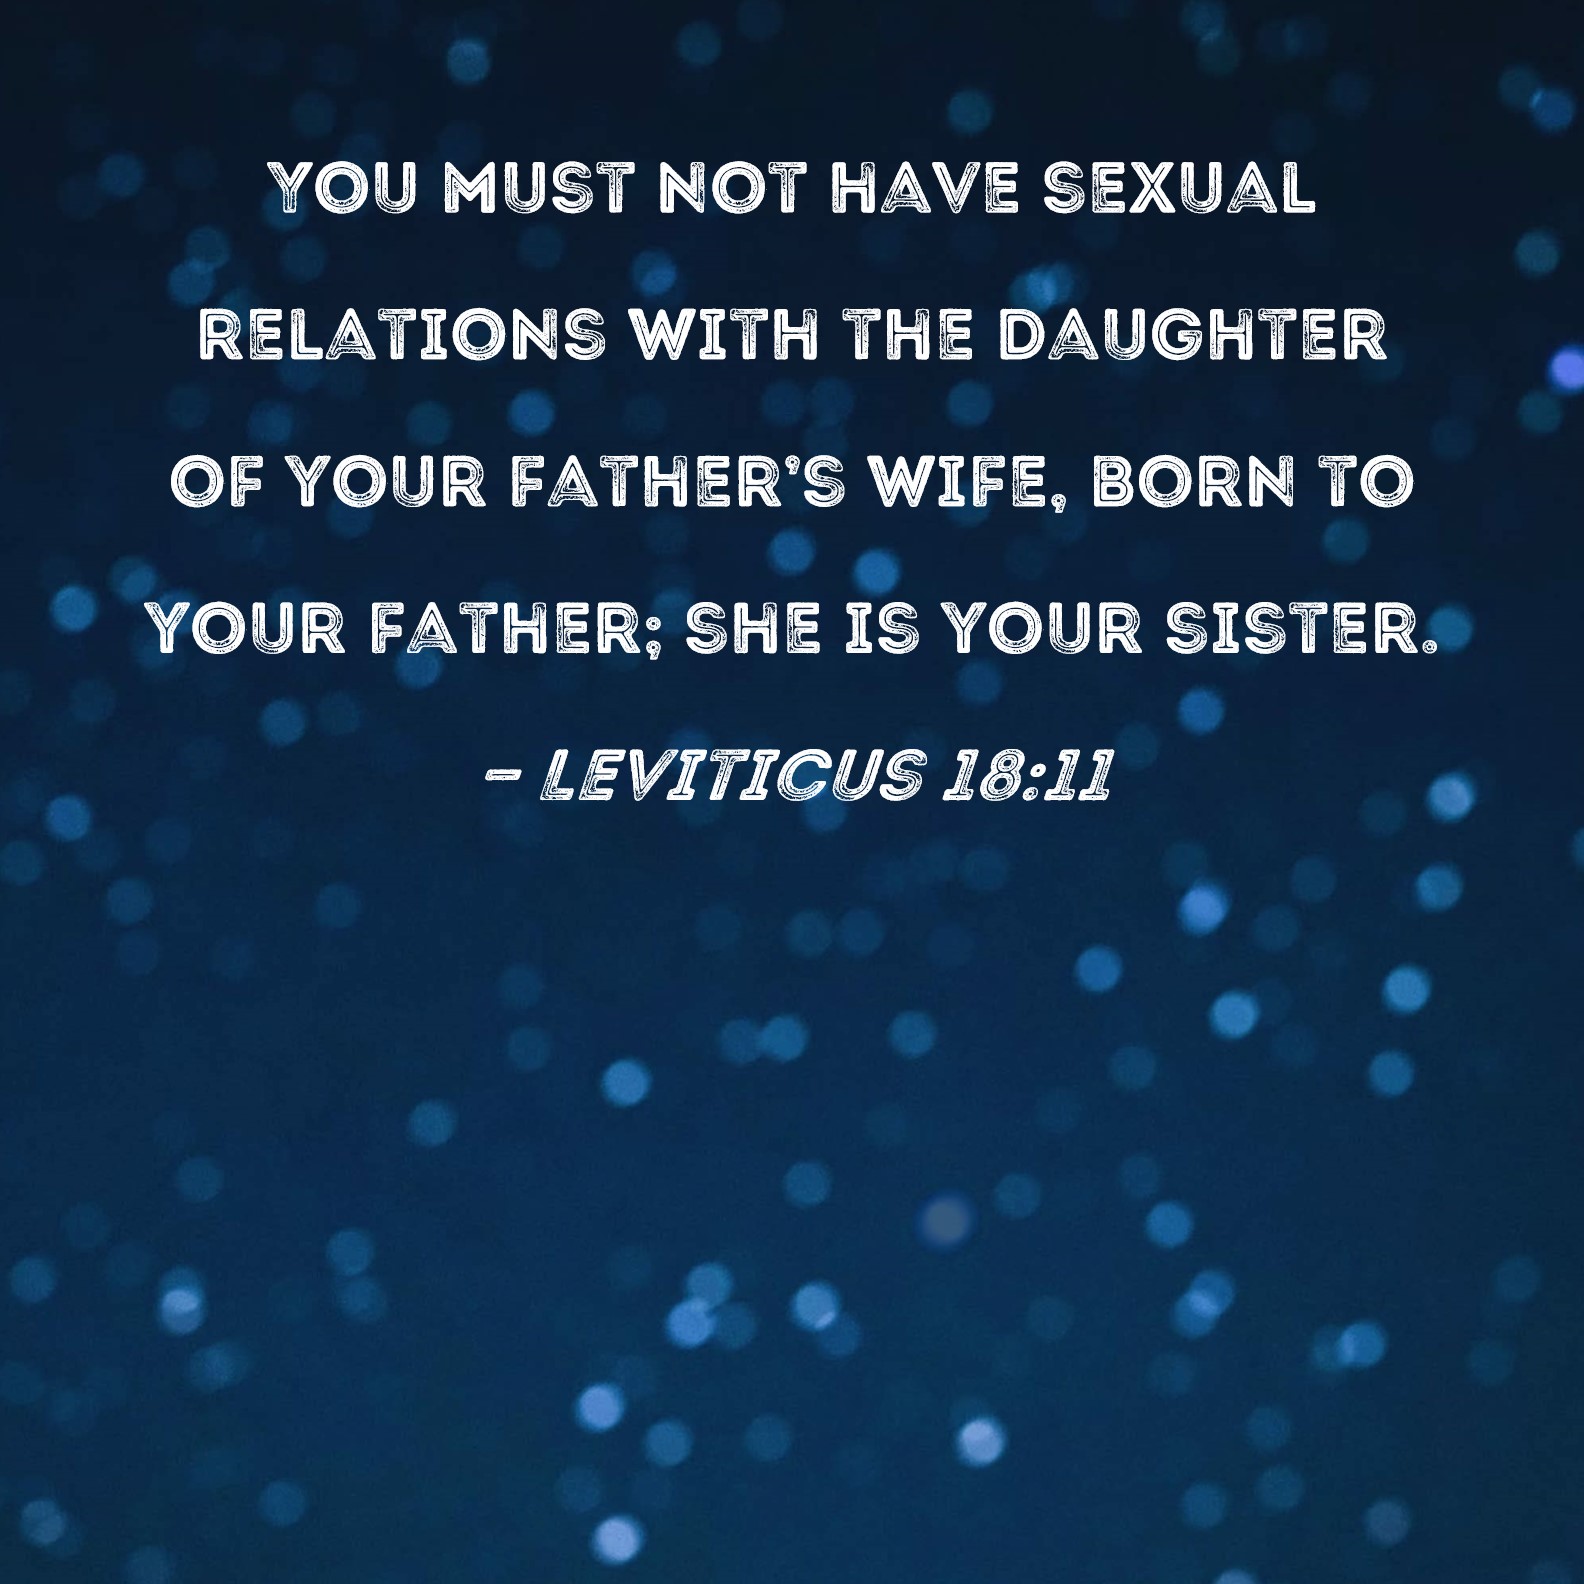 Leviticus 1811 You must not have sexual relations with the daughter of your fathers wife, born to your father; she is your sister. hq nude picture